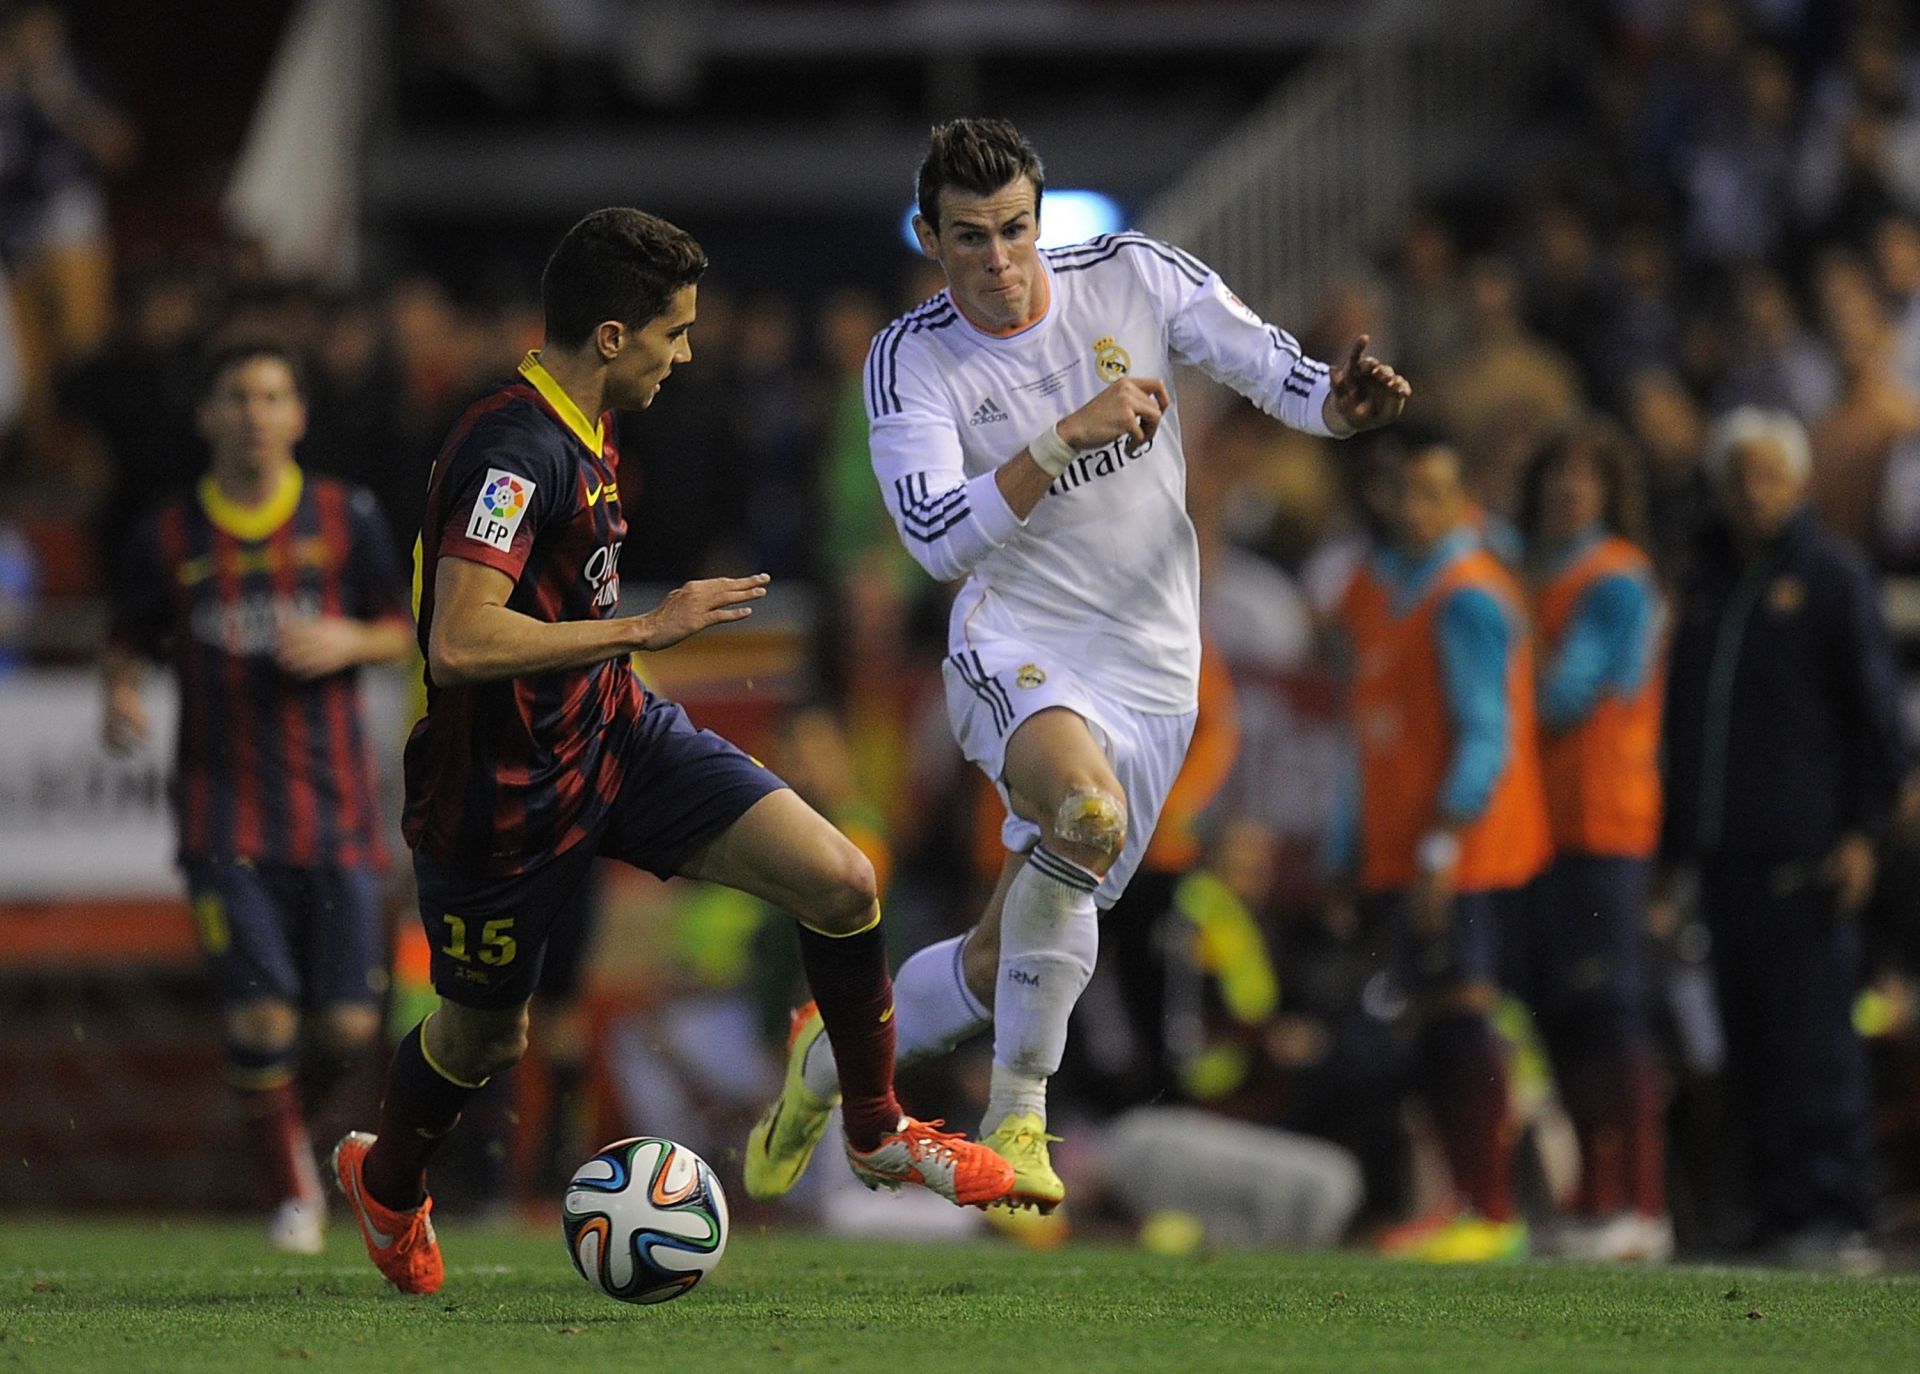 Gareth Bale scored one of the most iconic goals of all time in the 2014 Copa del Rey final against Barcelona